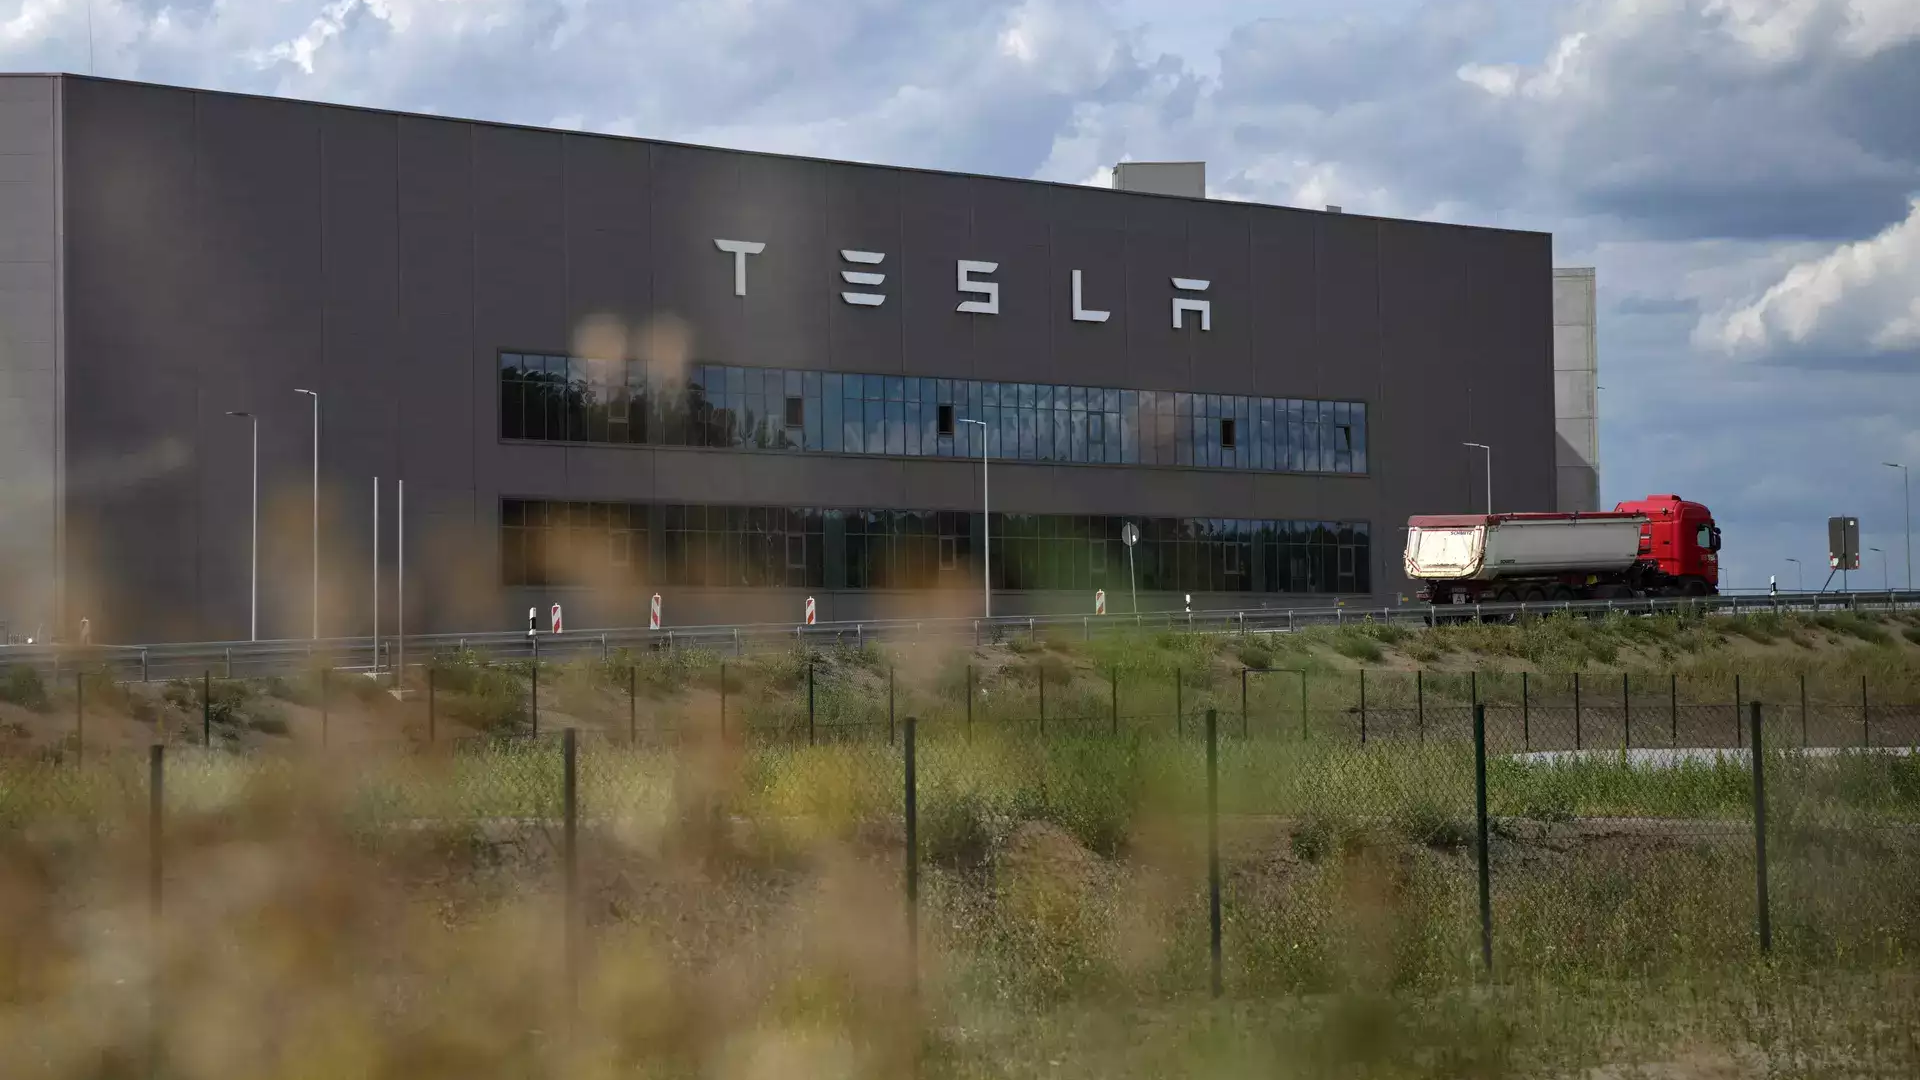 Tesla temporarily Shuts Down German Factory after Alleged Far-Left Sabotage Attack